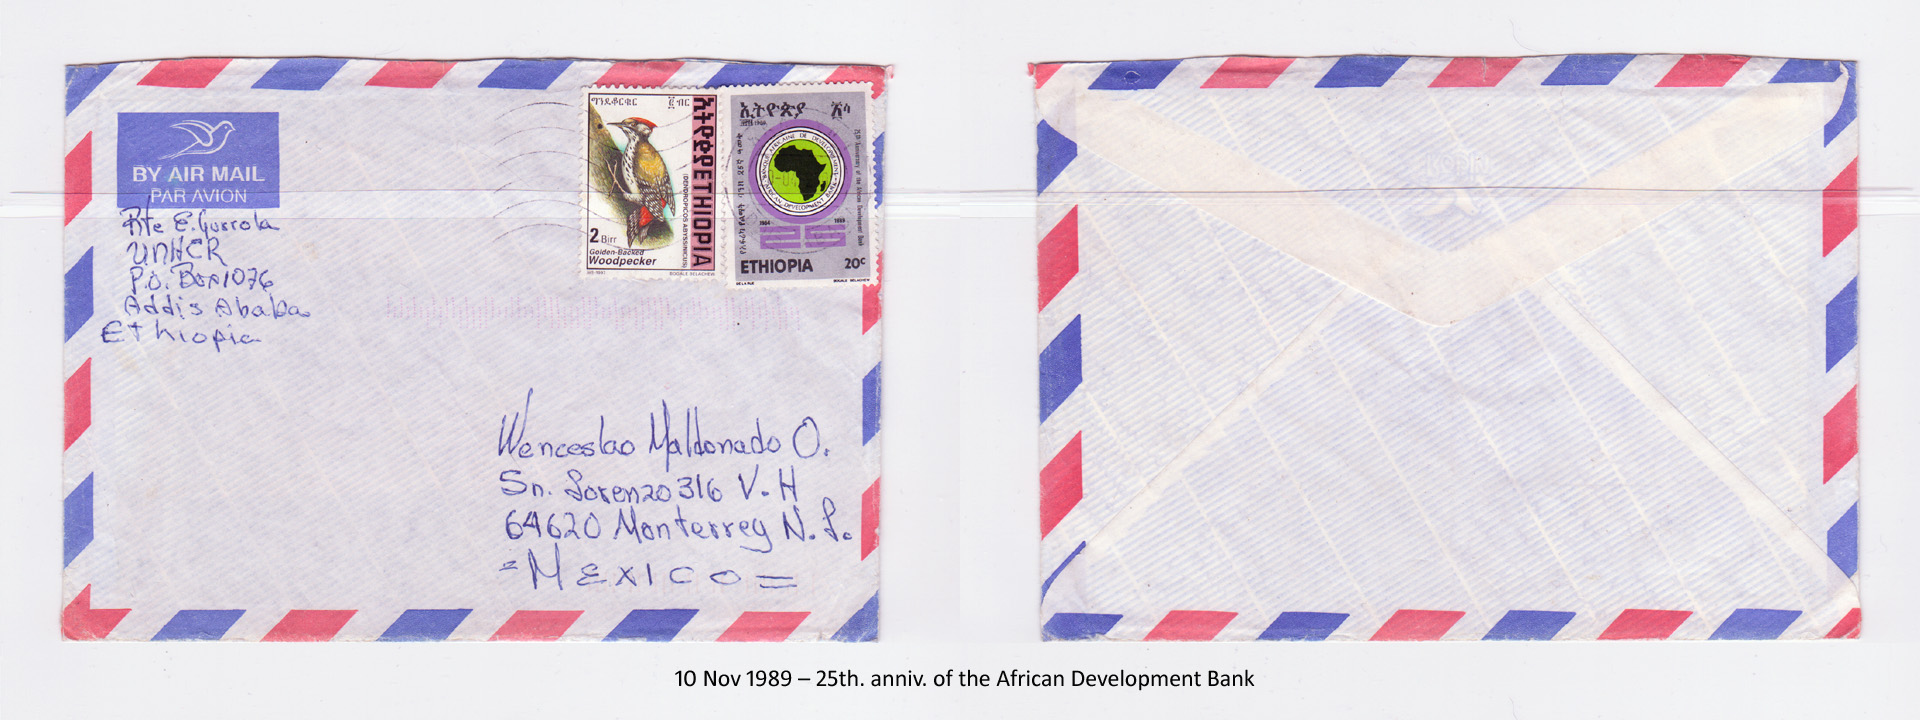 19891110 – 25th. anniv. of the African Development Bank